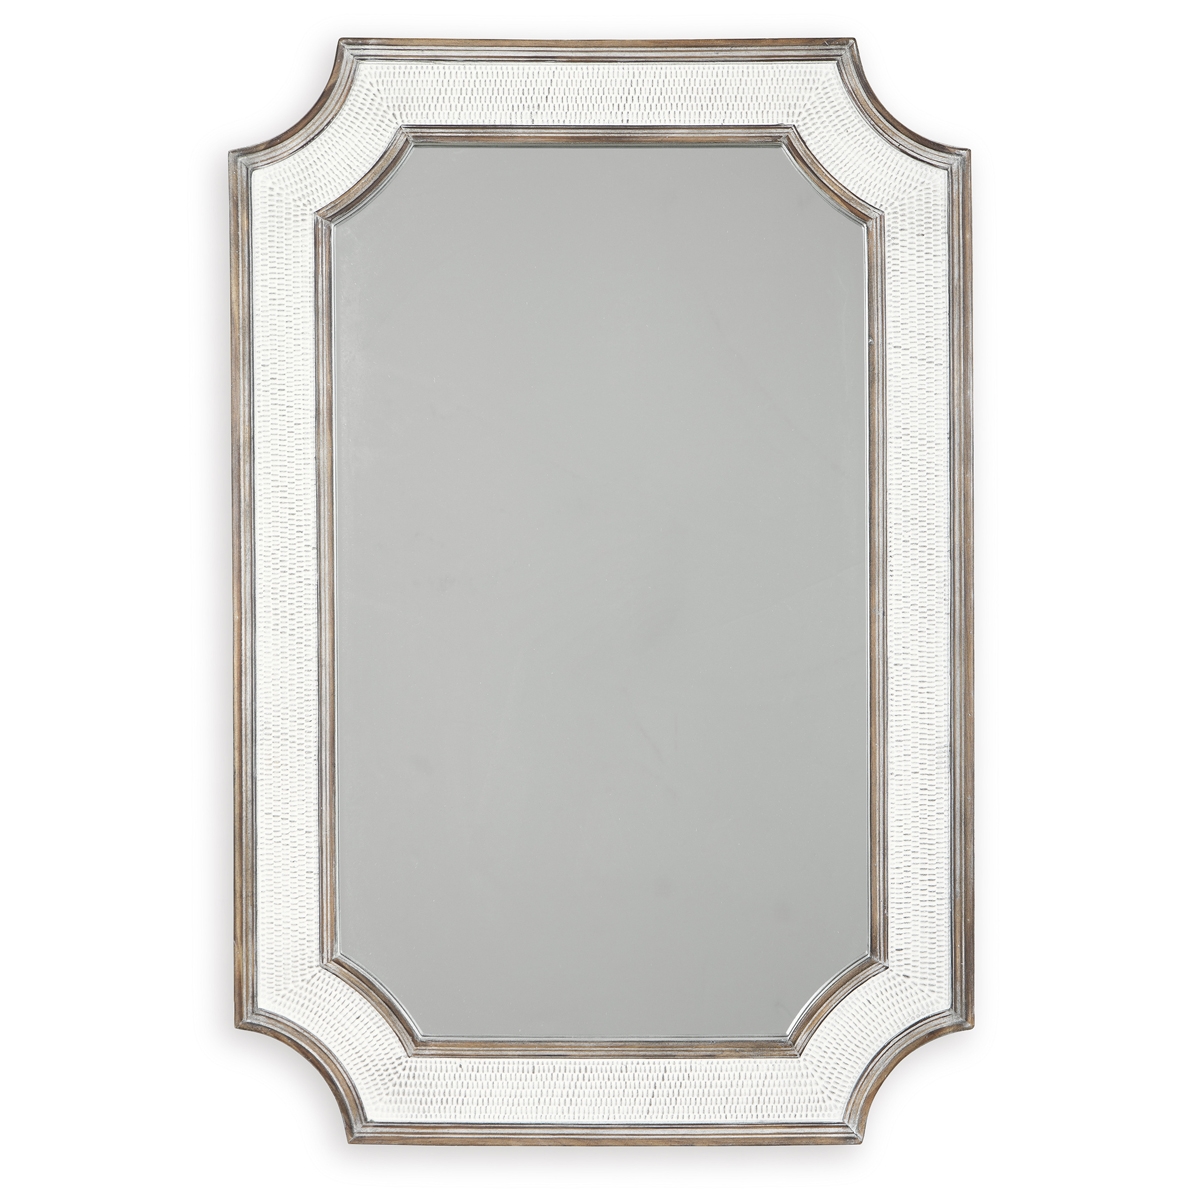 Picture of HOWSTON ACCENT MIRROR